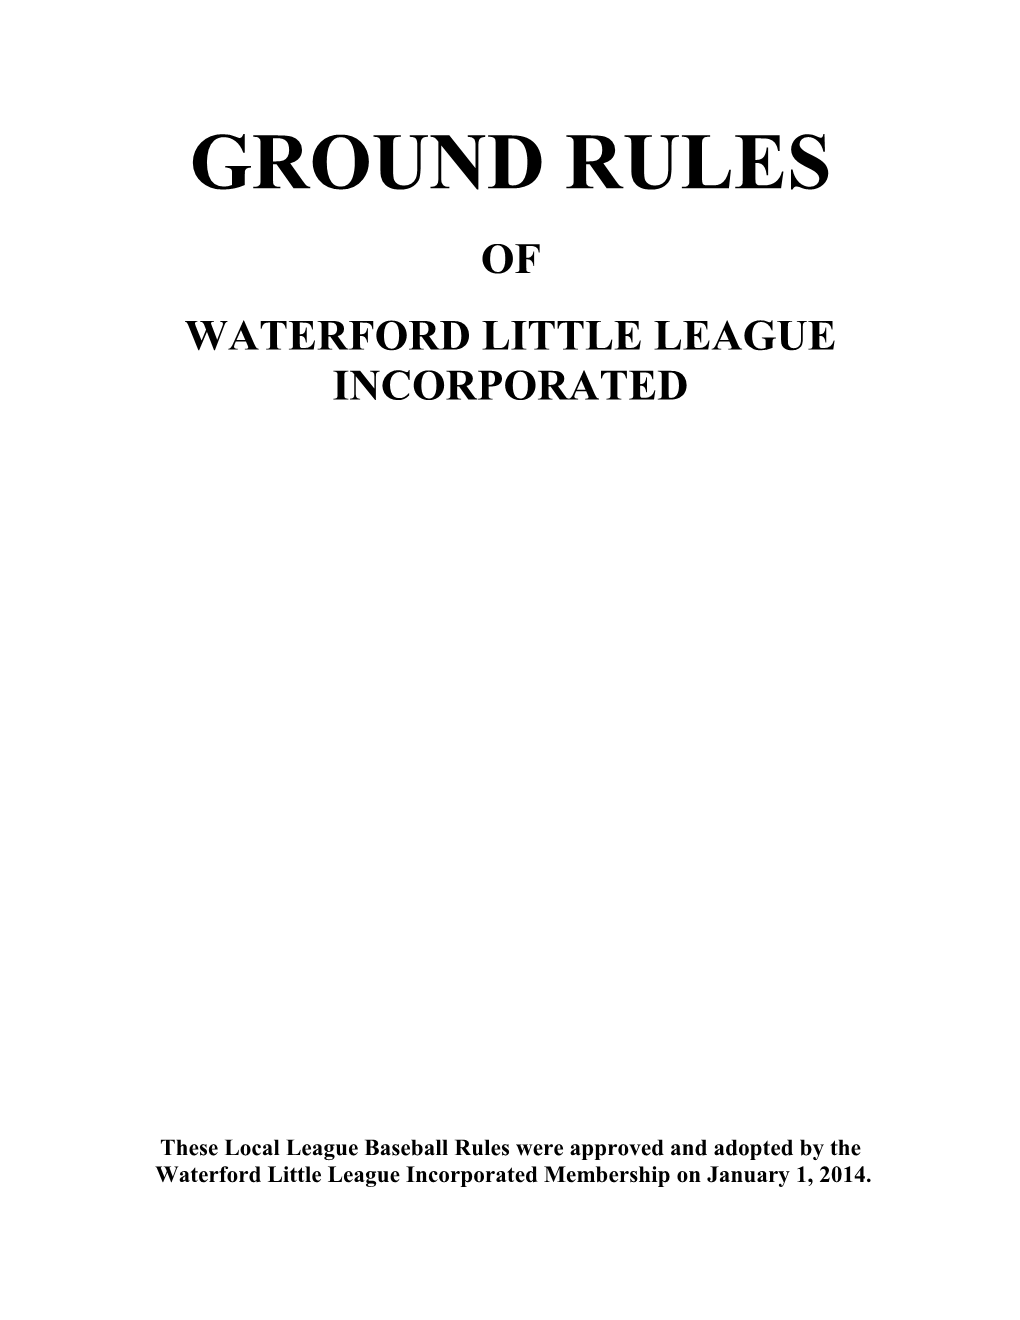 Welcome to Waterford Little League South